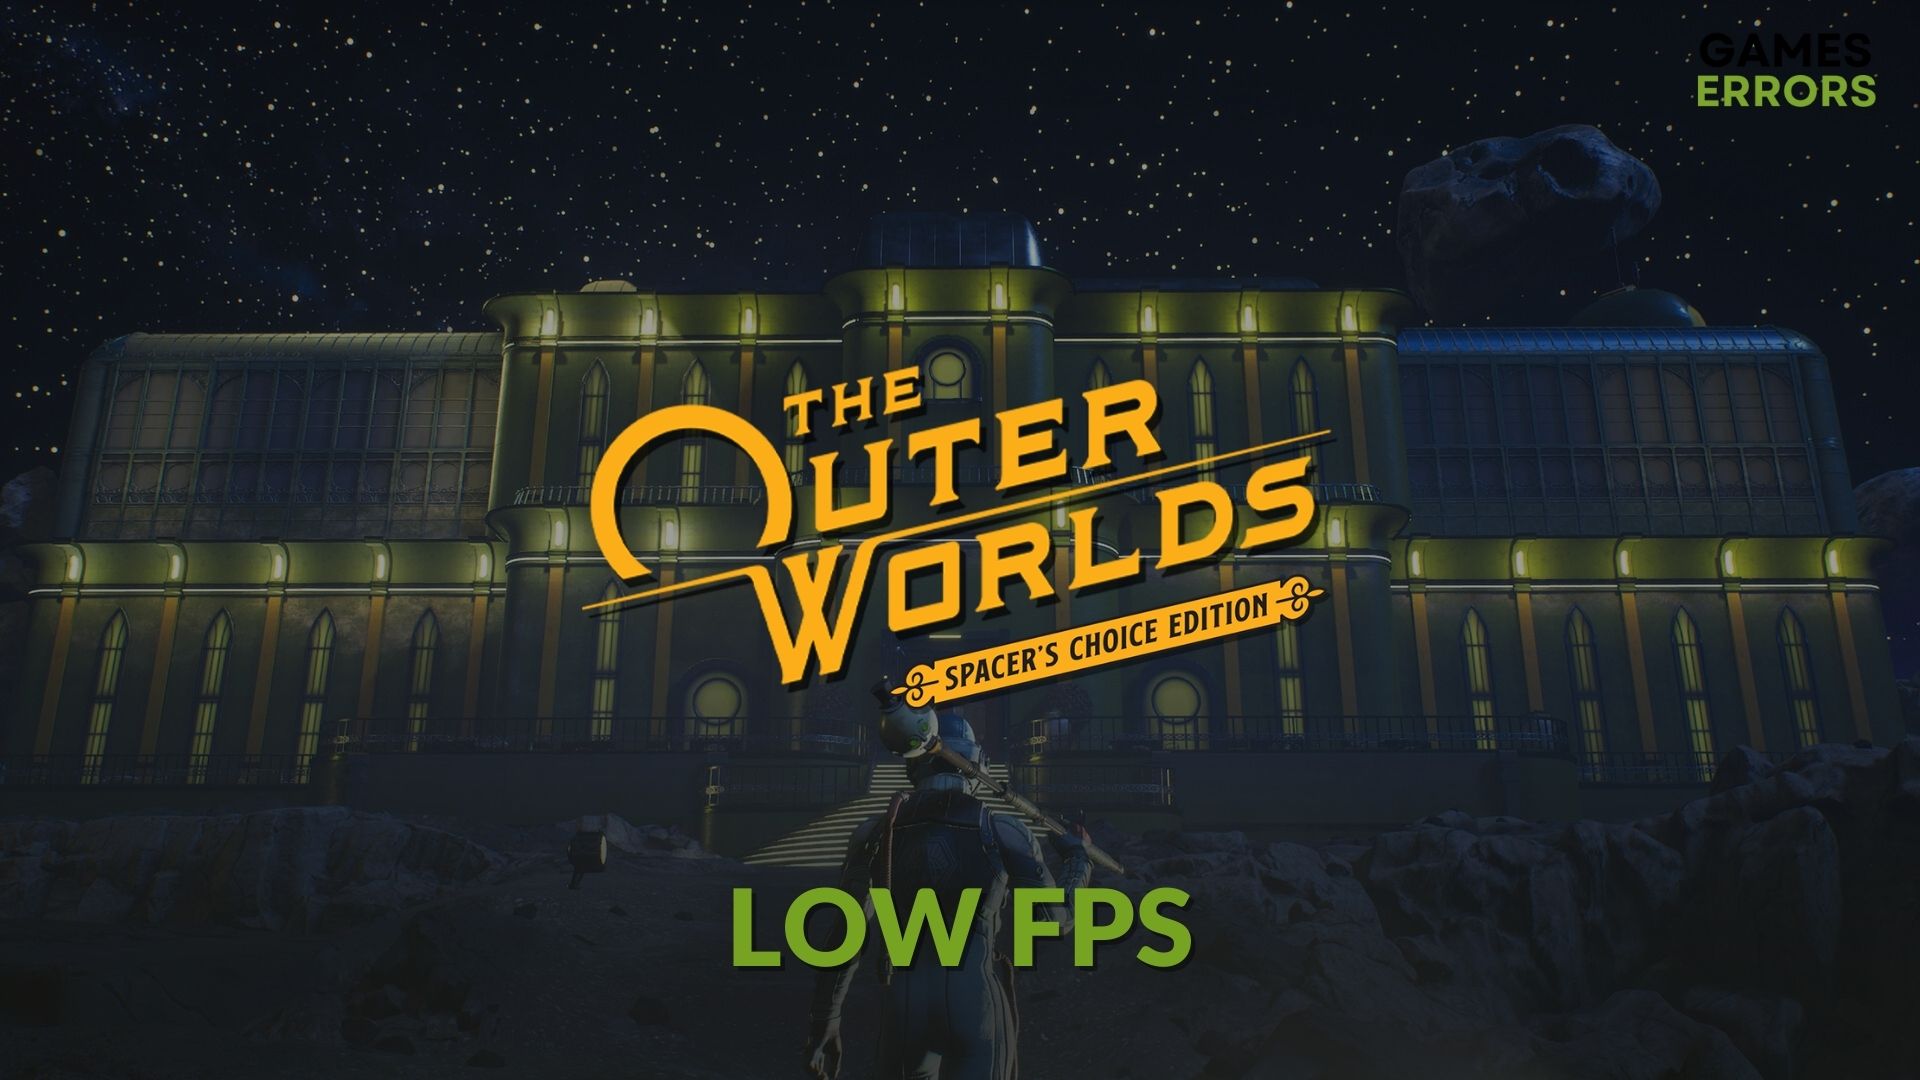 How to fix The Outer Worlds: Spacer's Choice Edition low fps